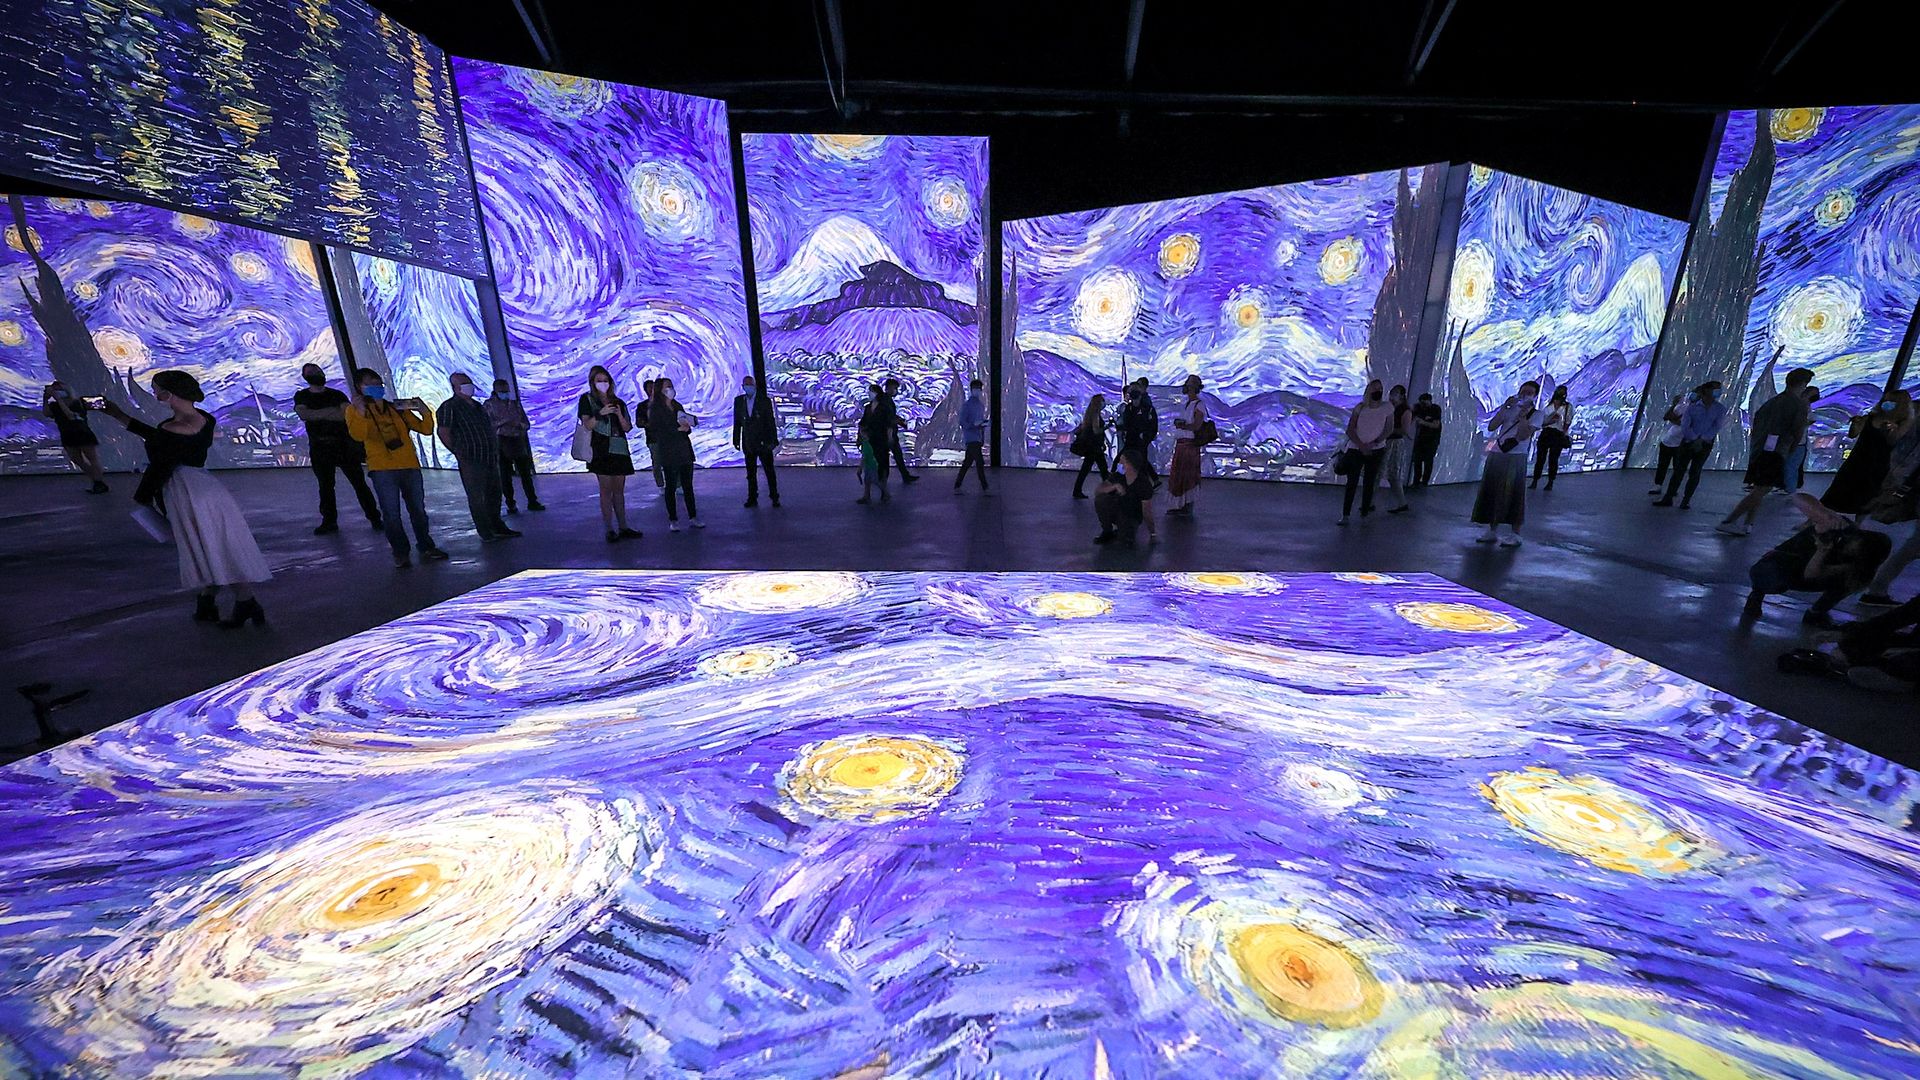 People walking around an immersive Van Gogh exhibit with "Starry Night" projected on screens around the room and the floor